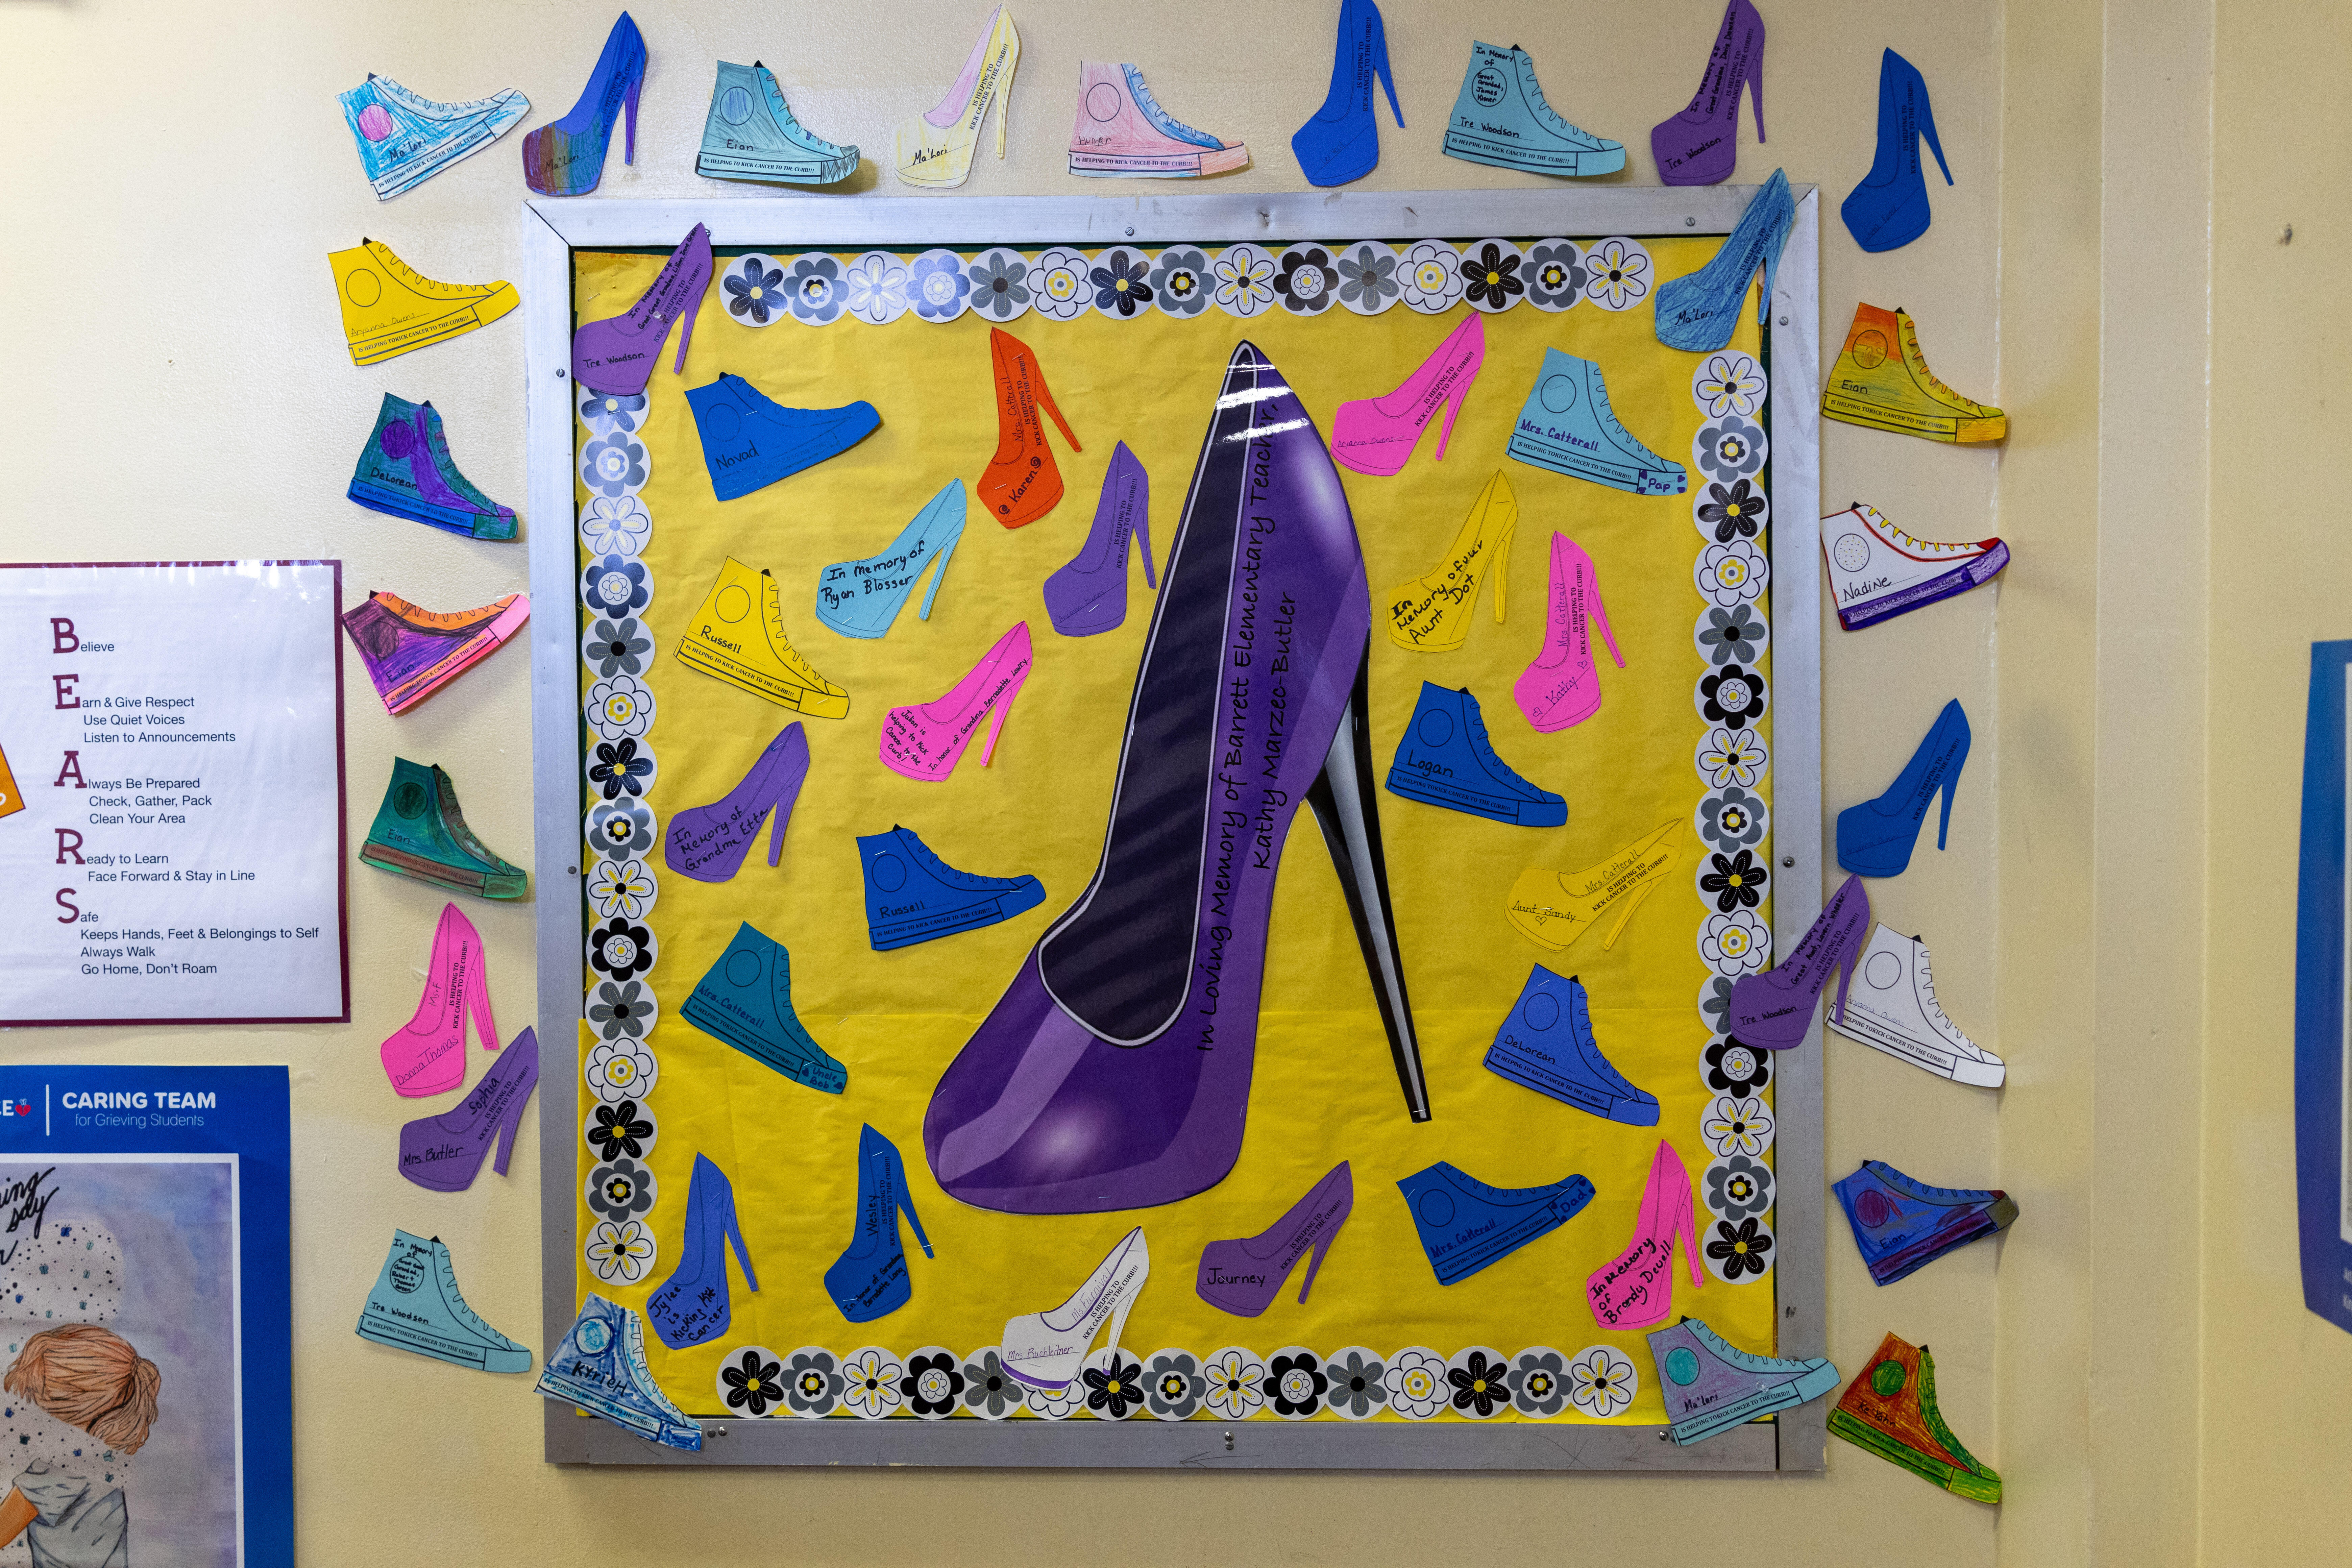 A photo depicting a large shoe cutout on a wall that served as a donation drive